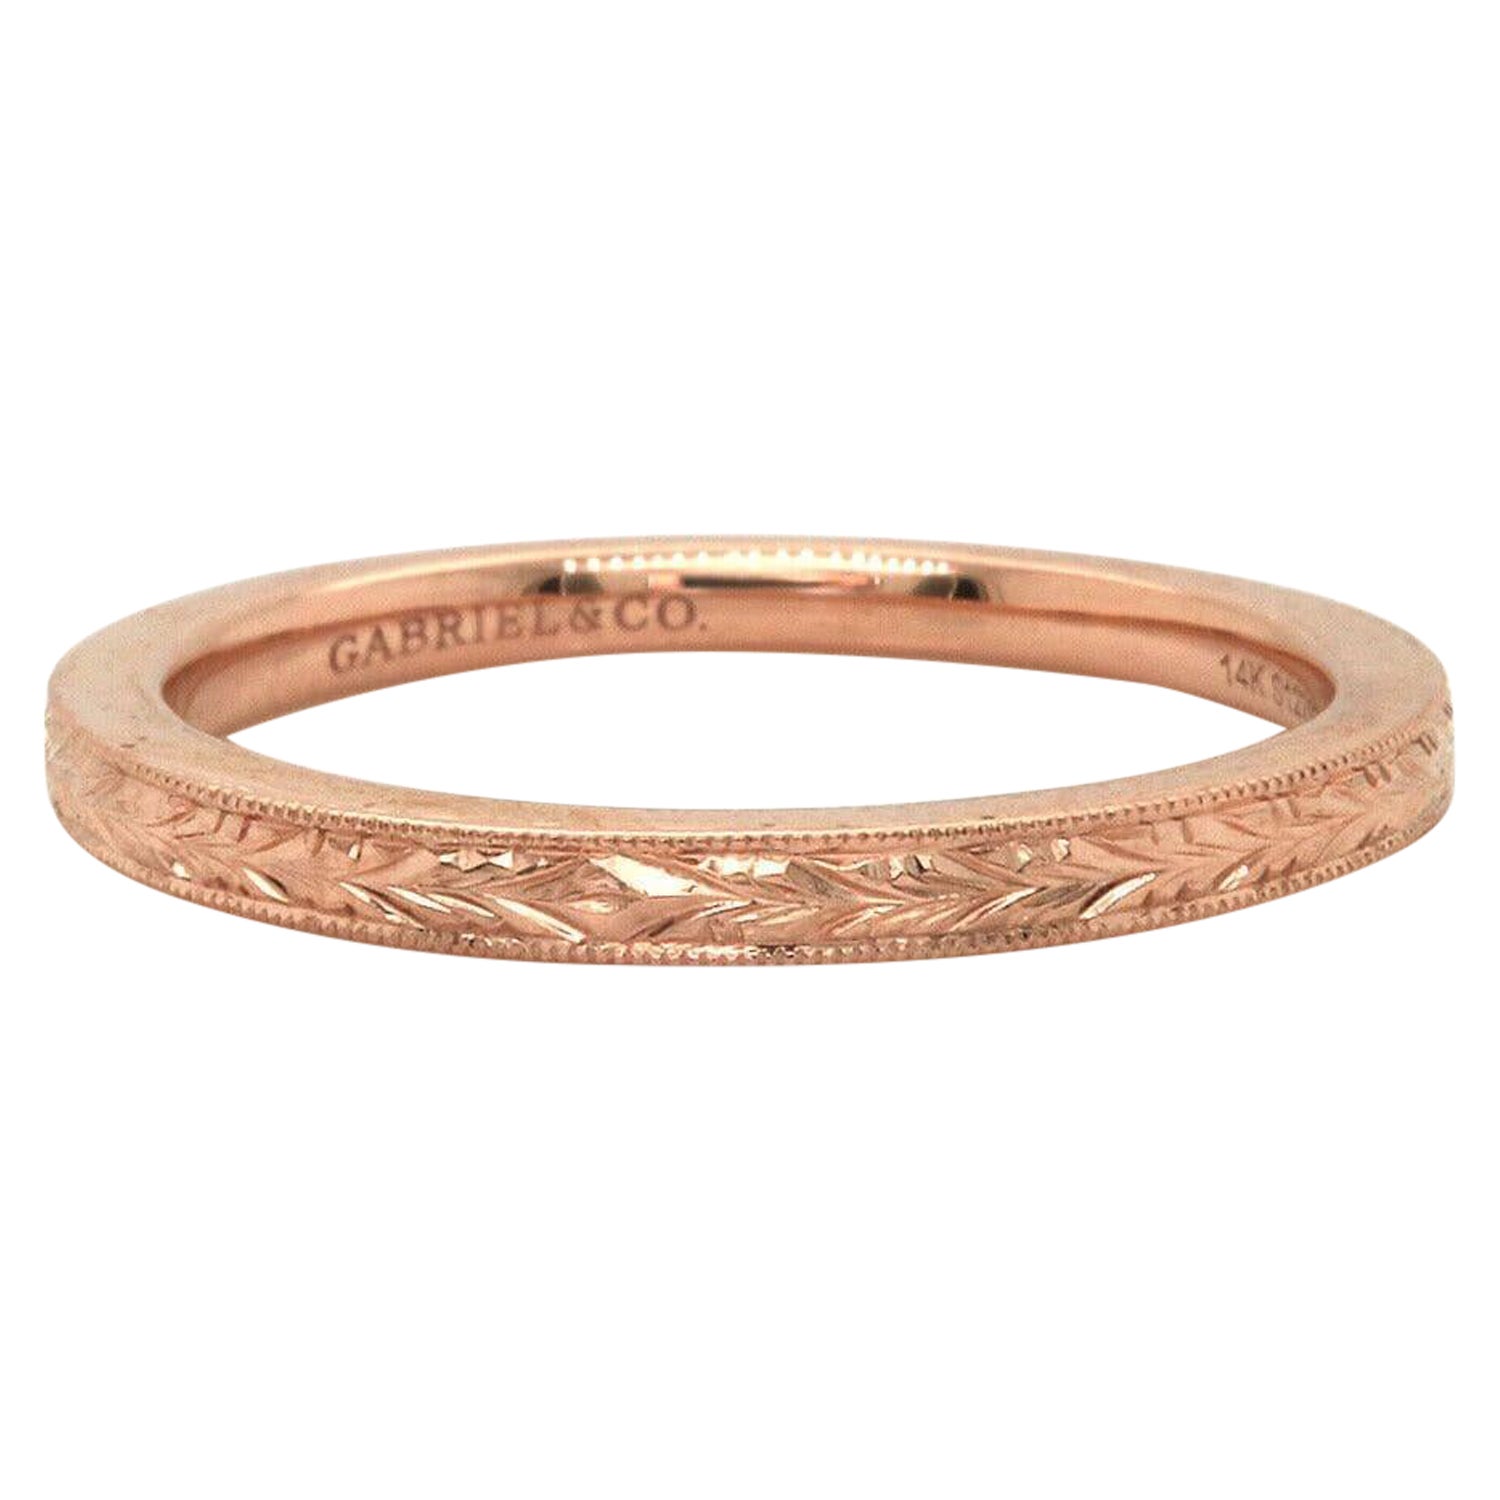 New Gabriel & Co. Filigree Engraved Band Ring in 14K Rose Gold For Sale